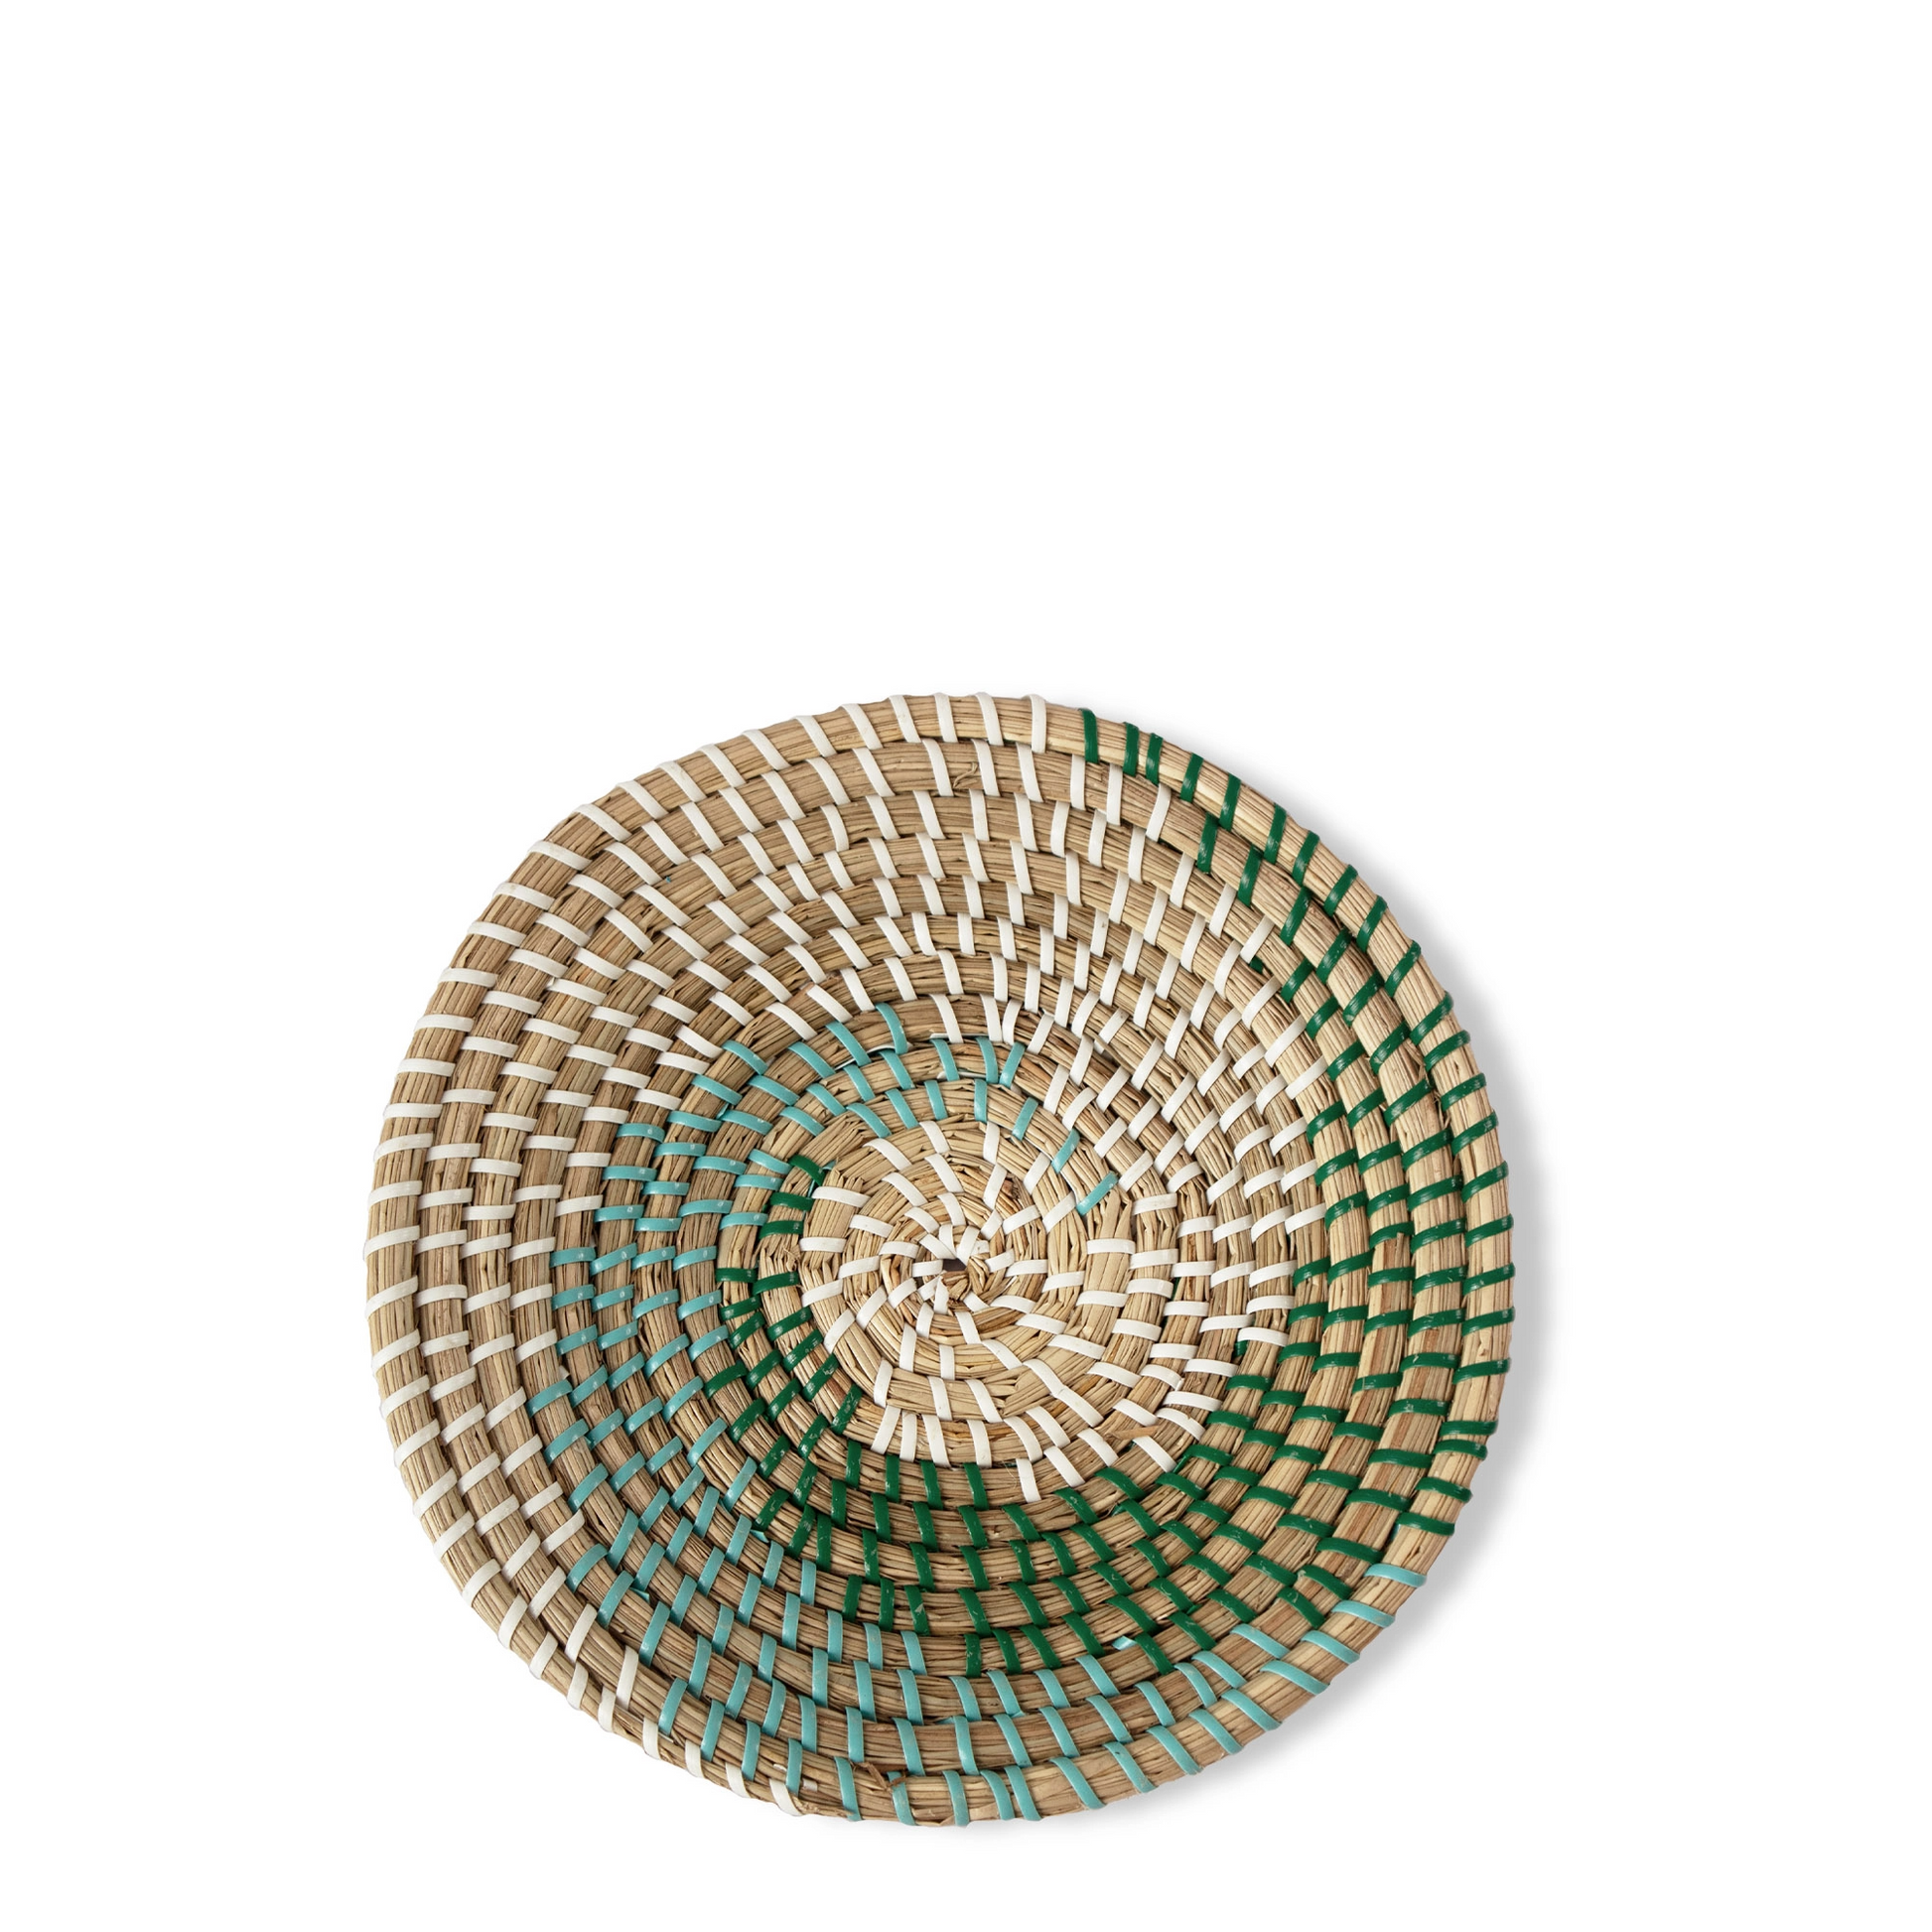 Woven Seagrass Basket/Bowl - Wave - 10-in - Mellow Monkey